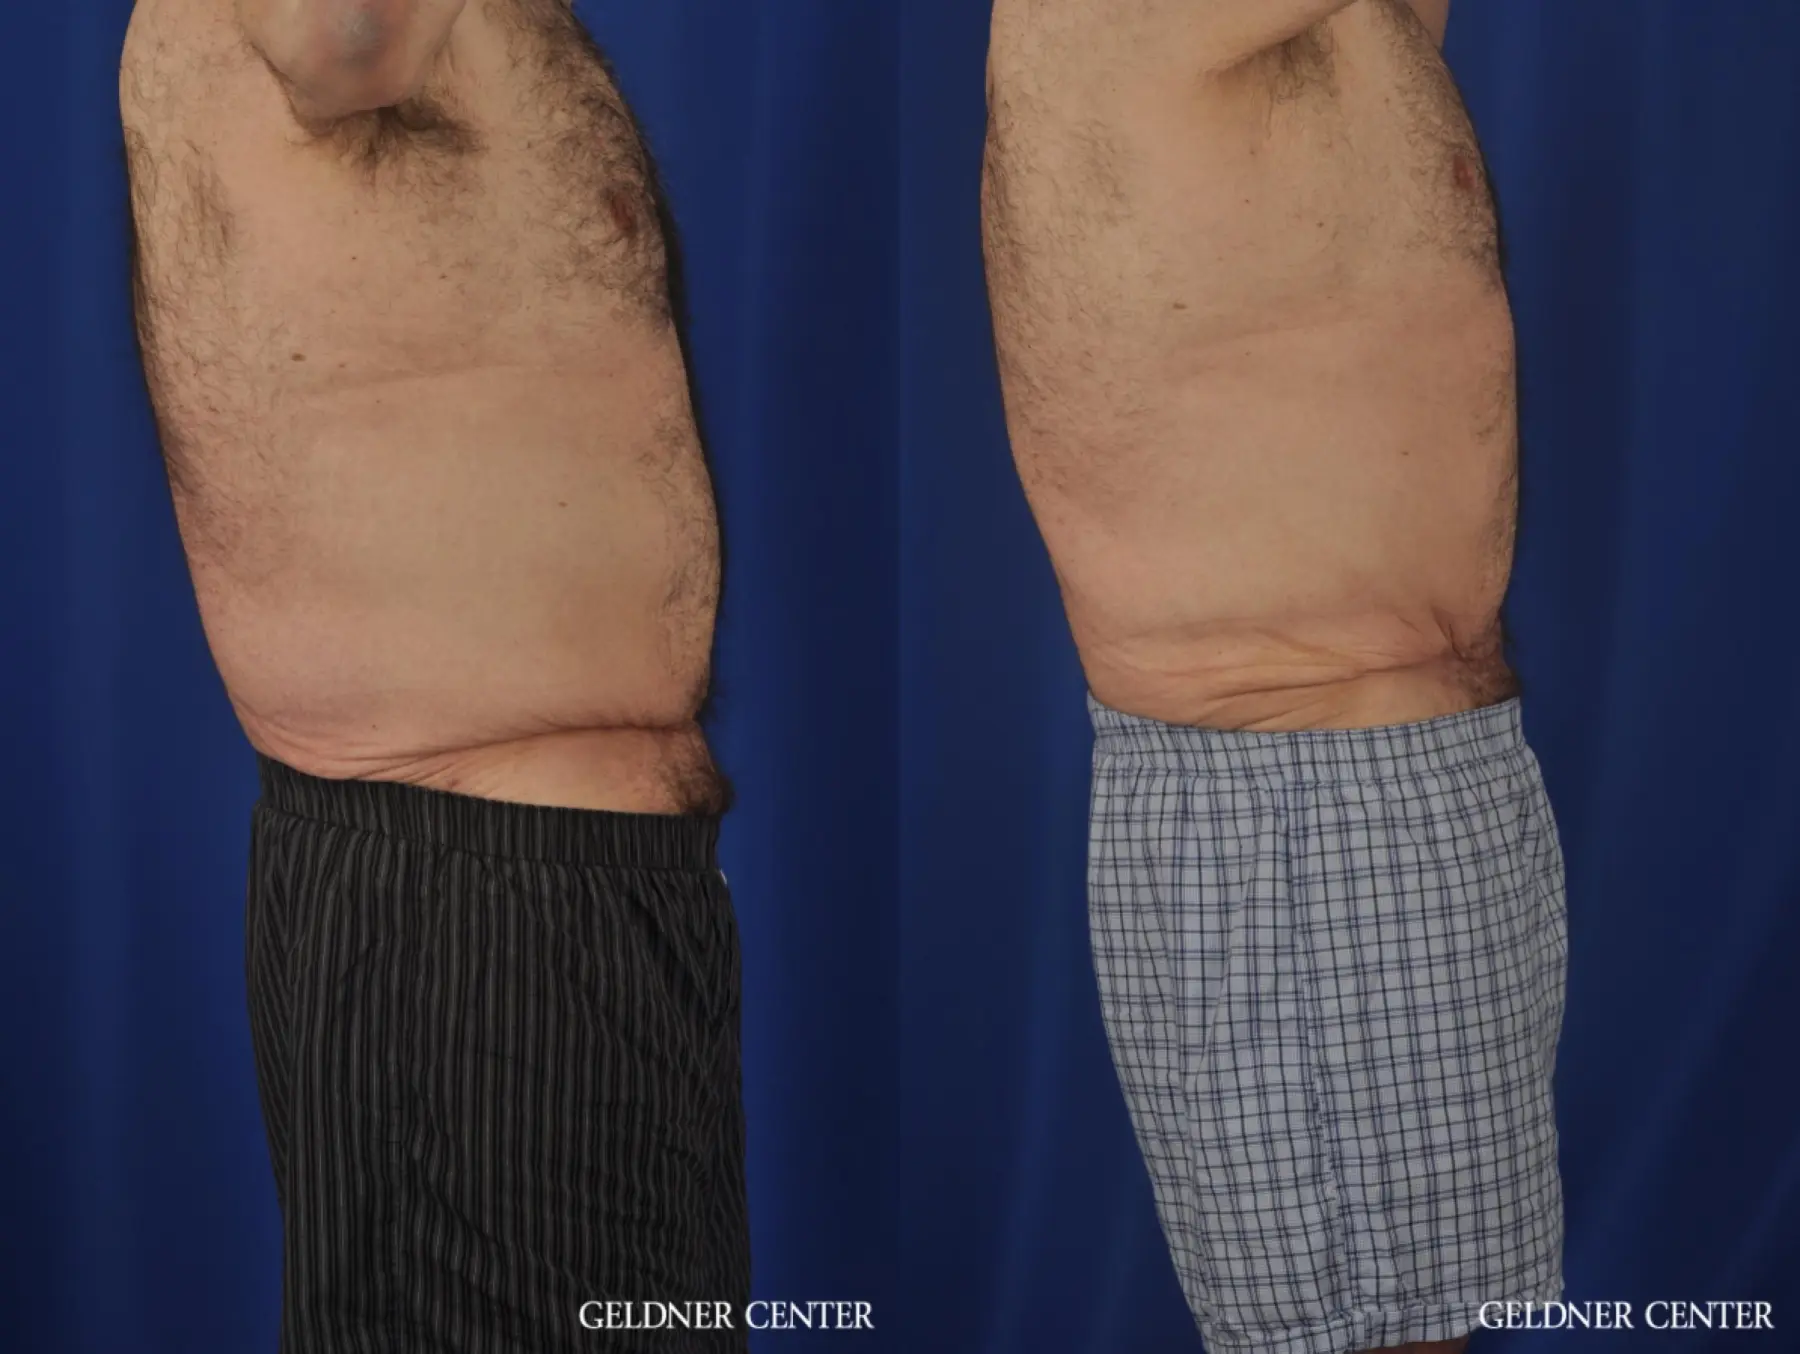 Abdominoplasty For Men: Patient 3 - Before and After 3